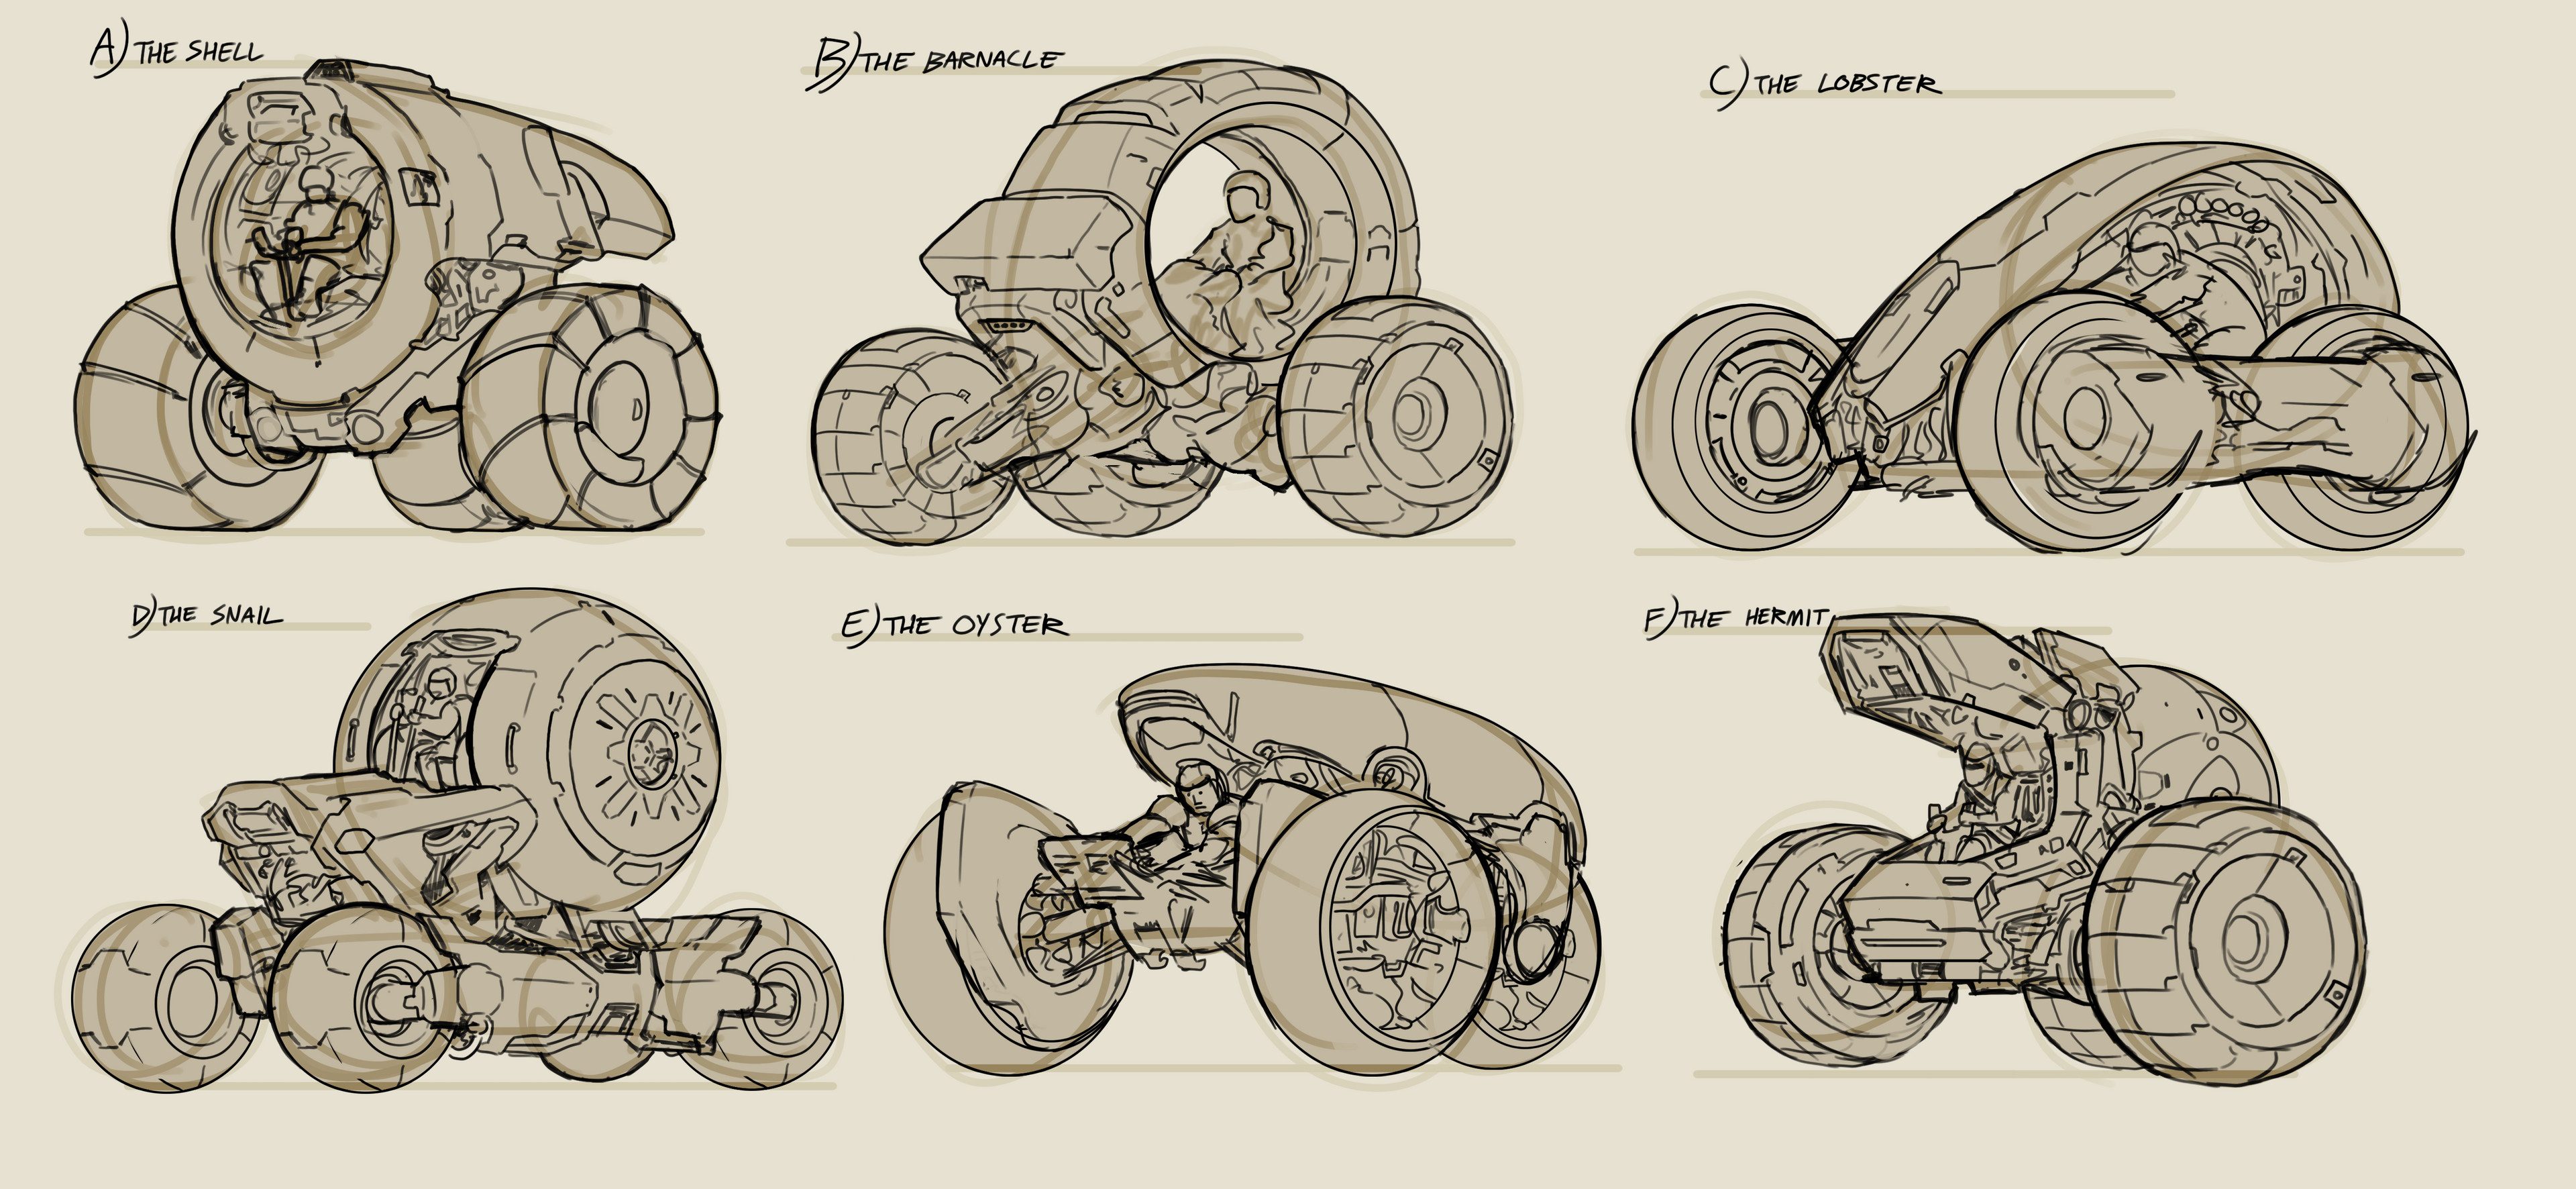 Some initial explorations for the vehicle